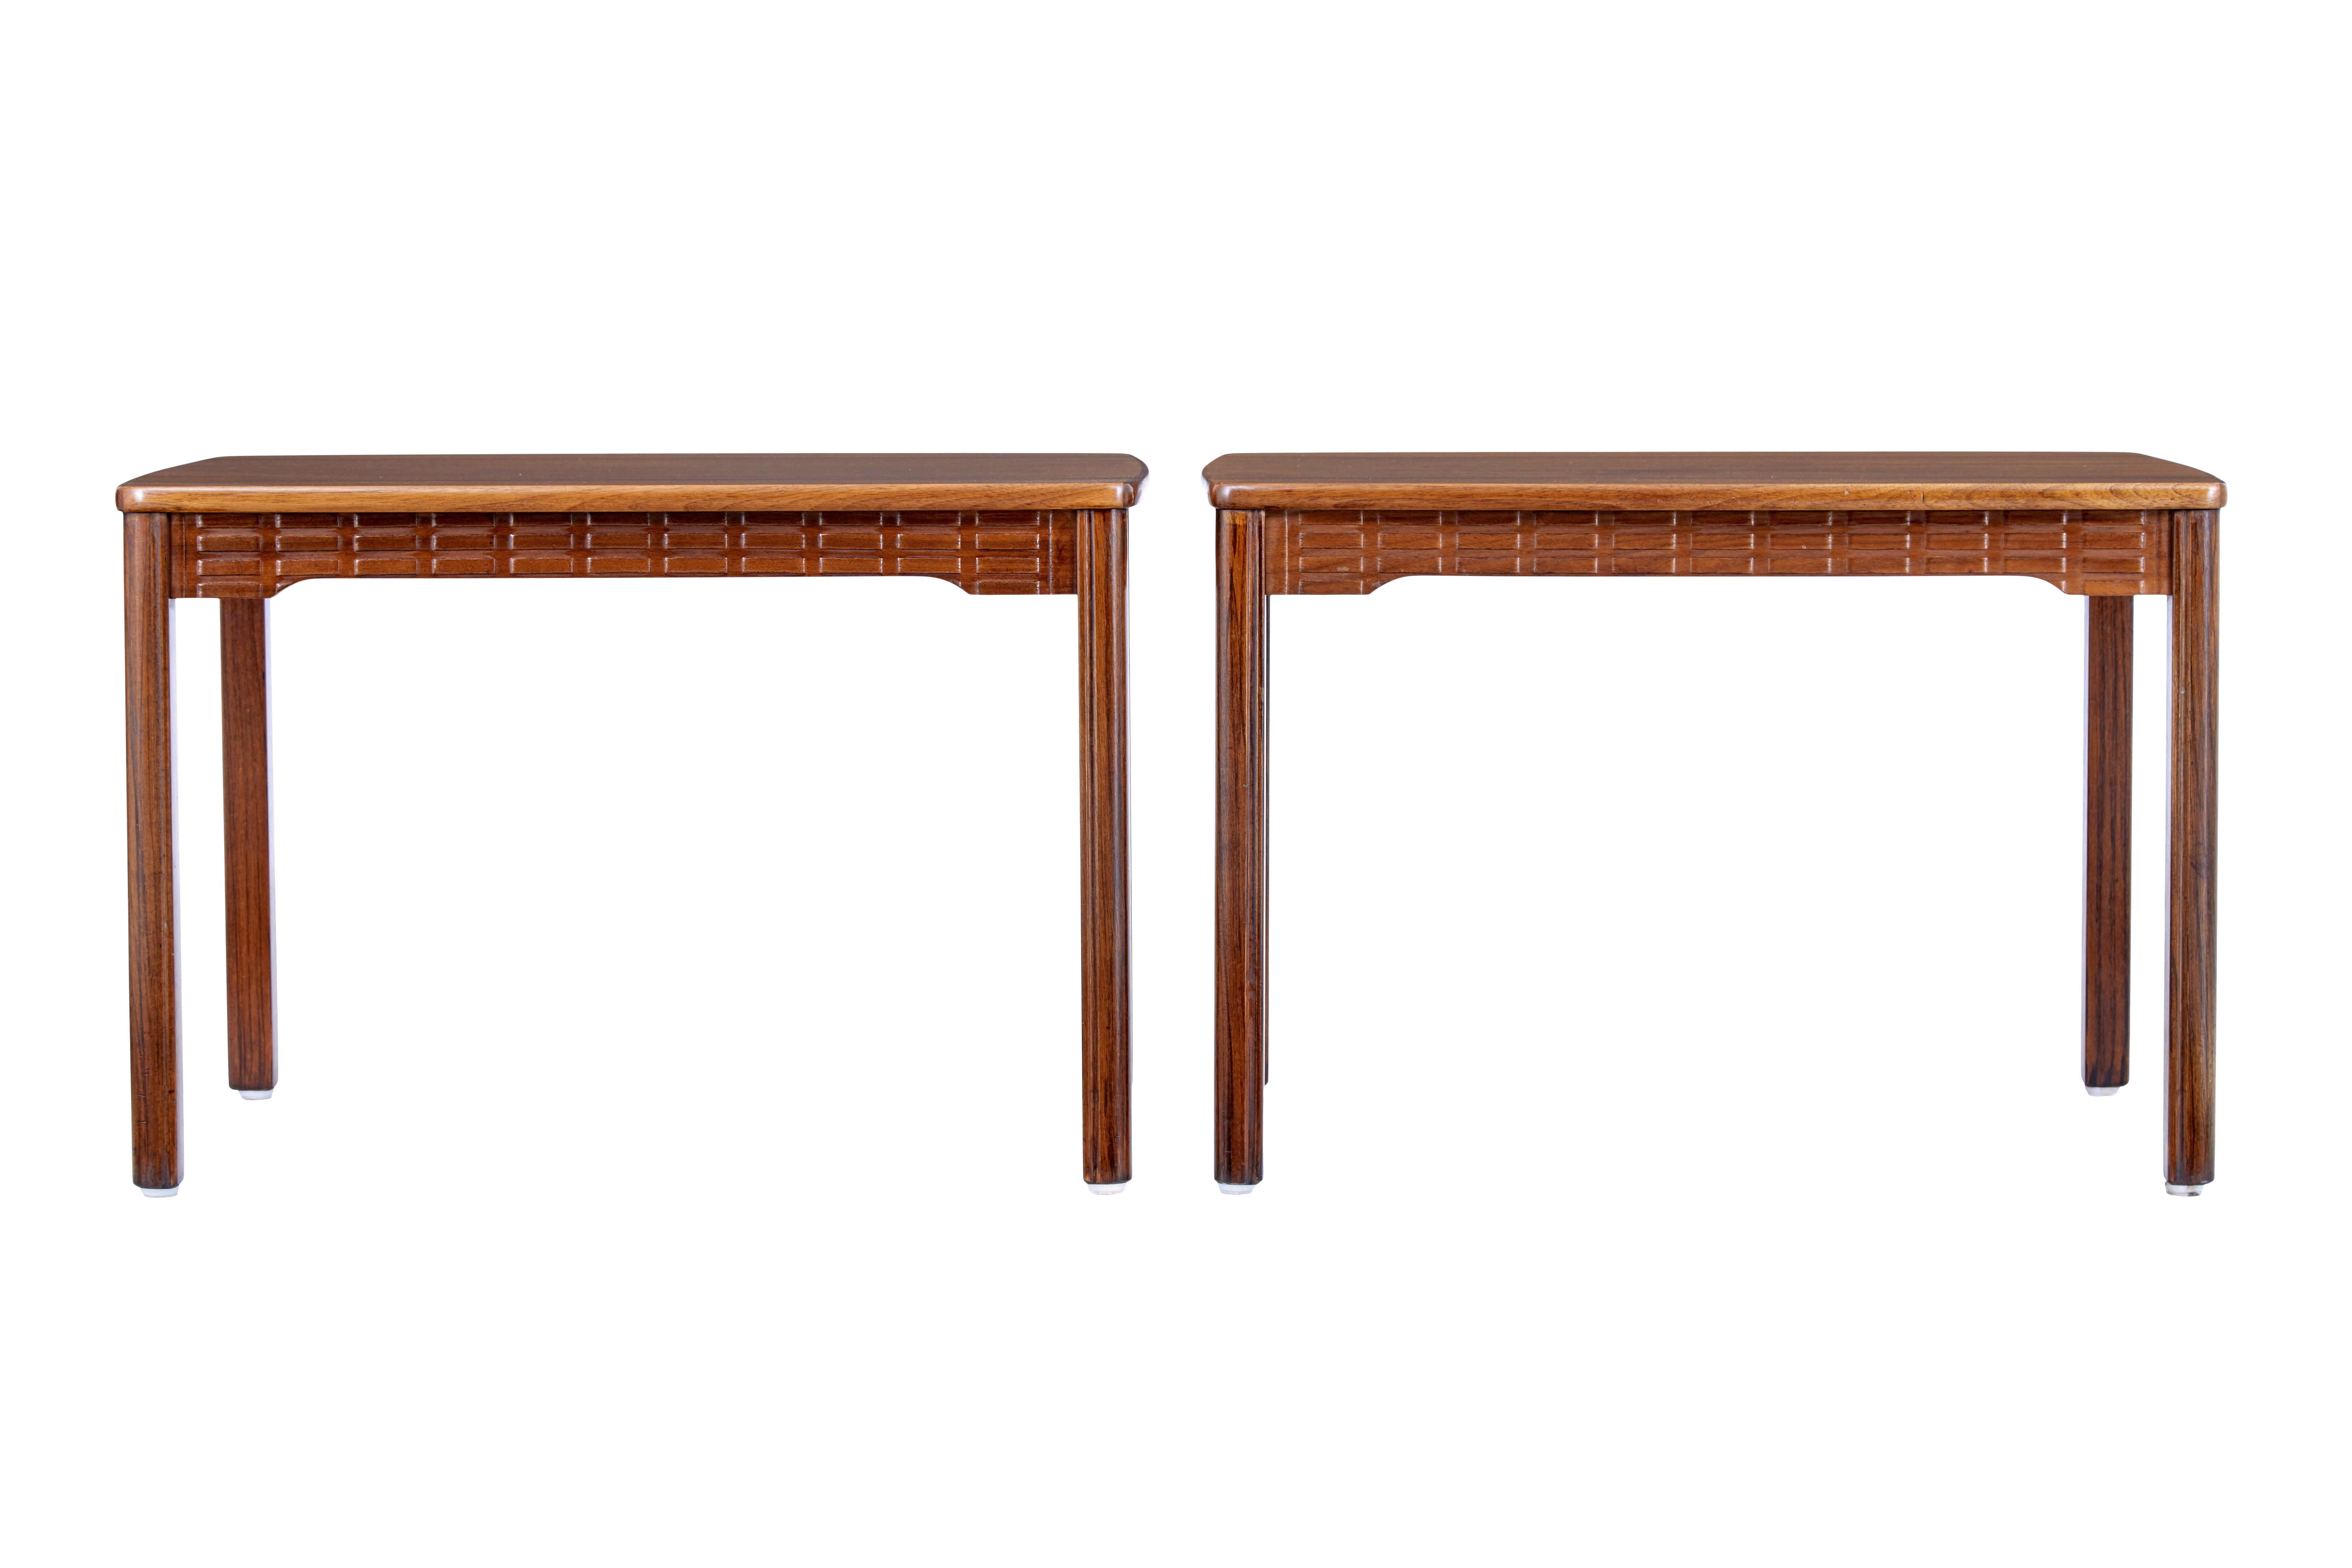 Pair of mid century teak side tables circa 1960.

Pair of scandinavian teak side tables, ideal for being either end of the sofa, or many possibilities around the home.

Richly coloured rectangular tops with slightly rounded edges.  Carved frieze